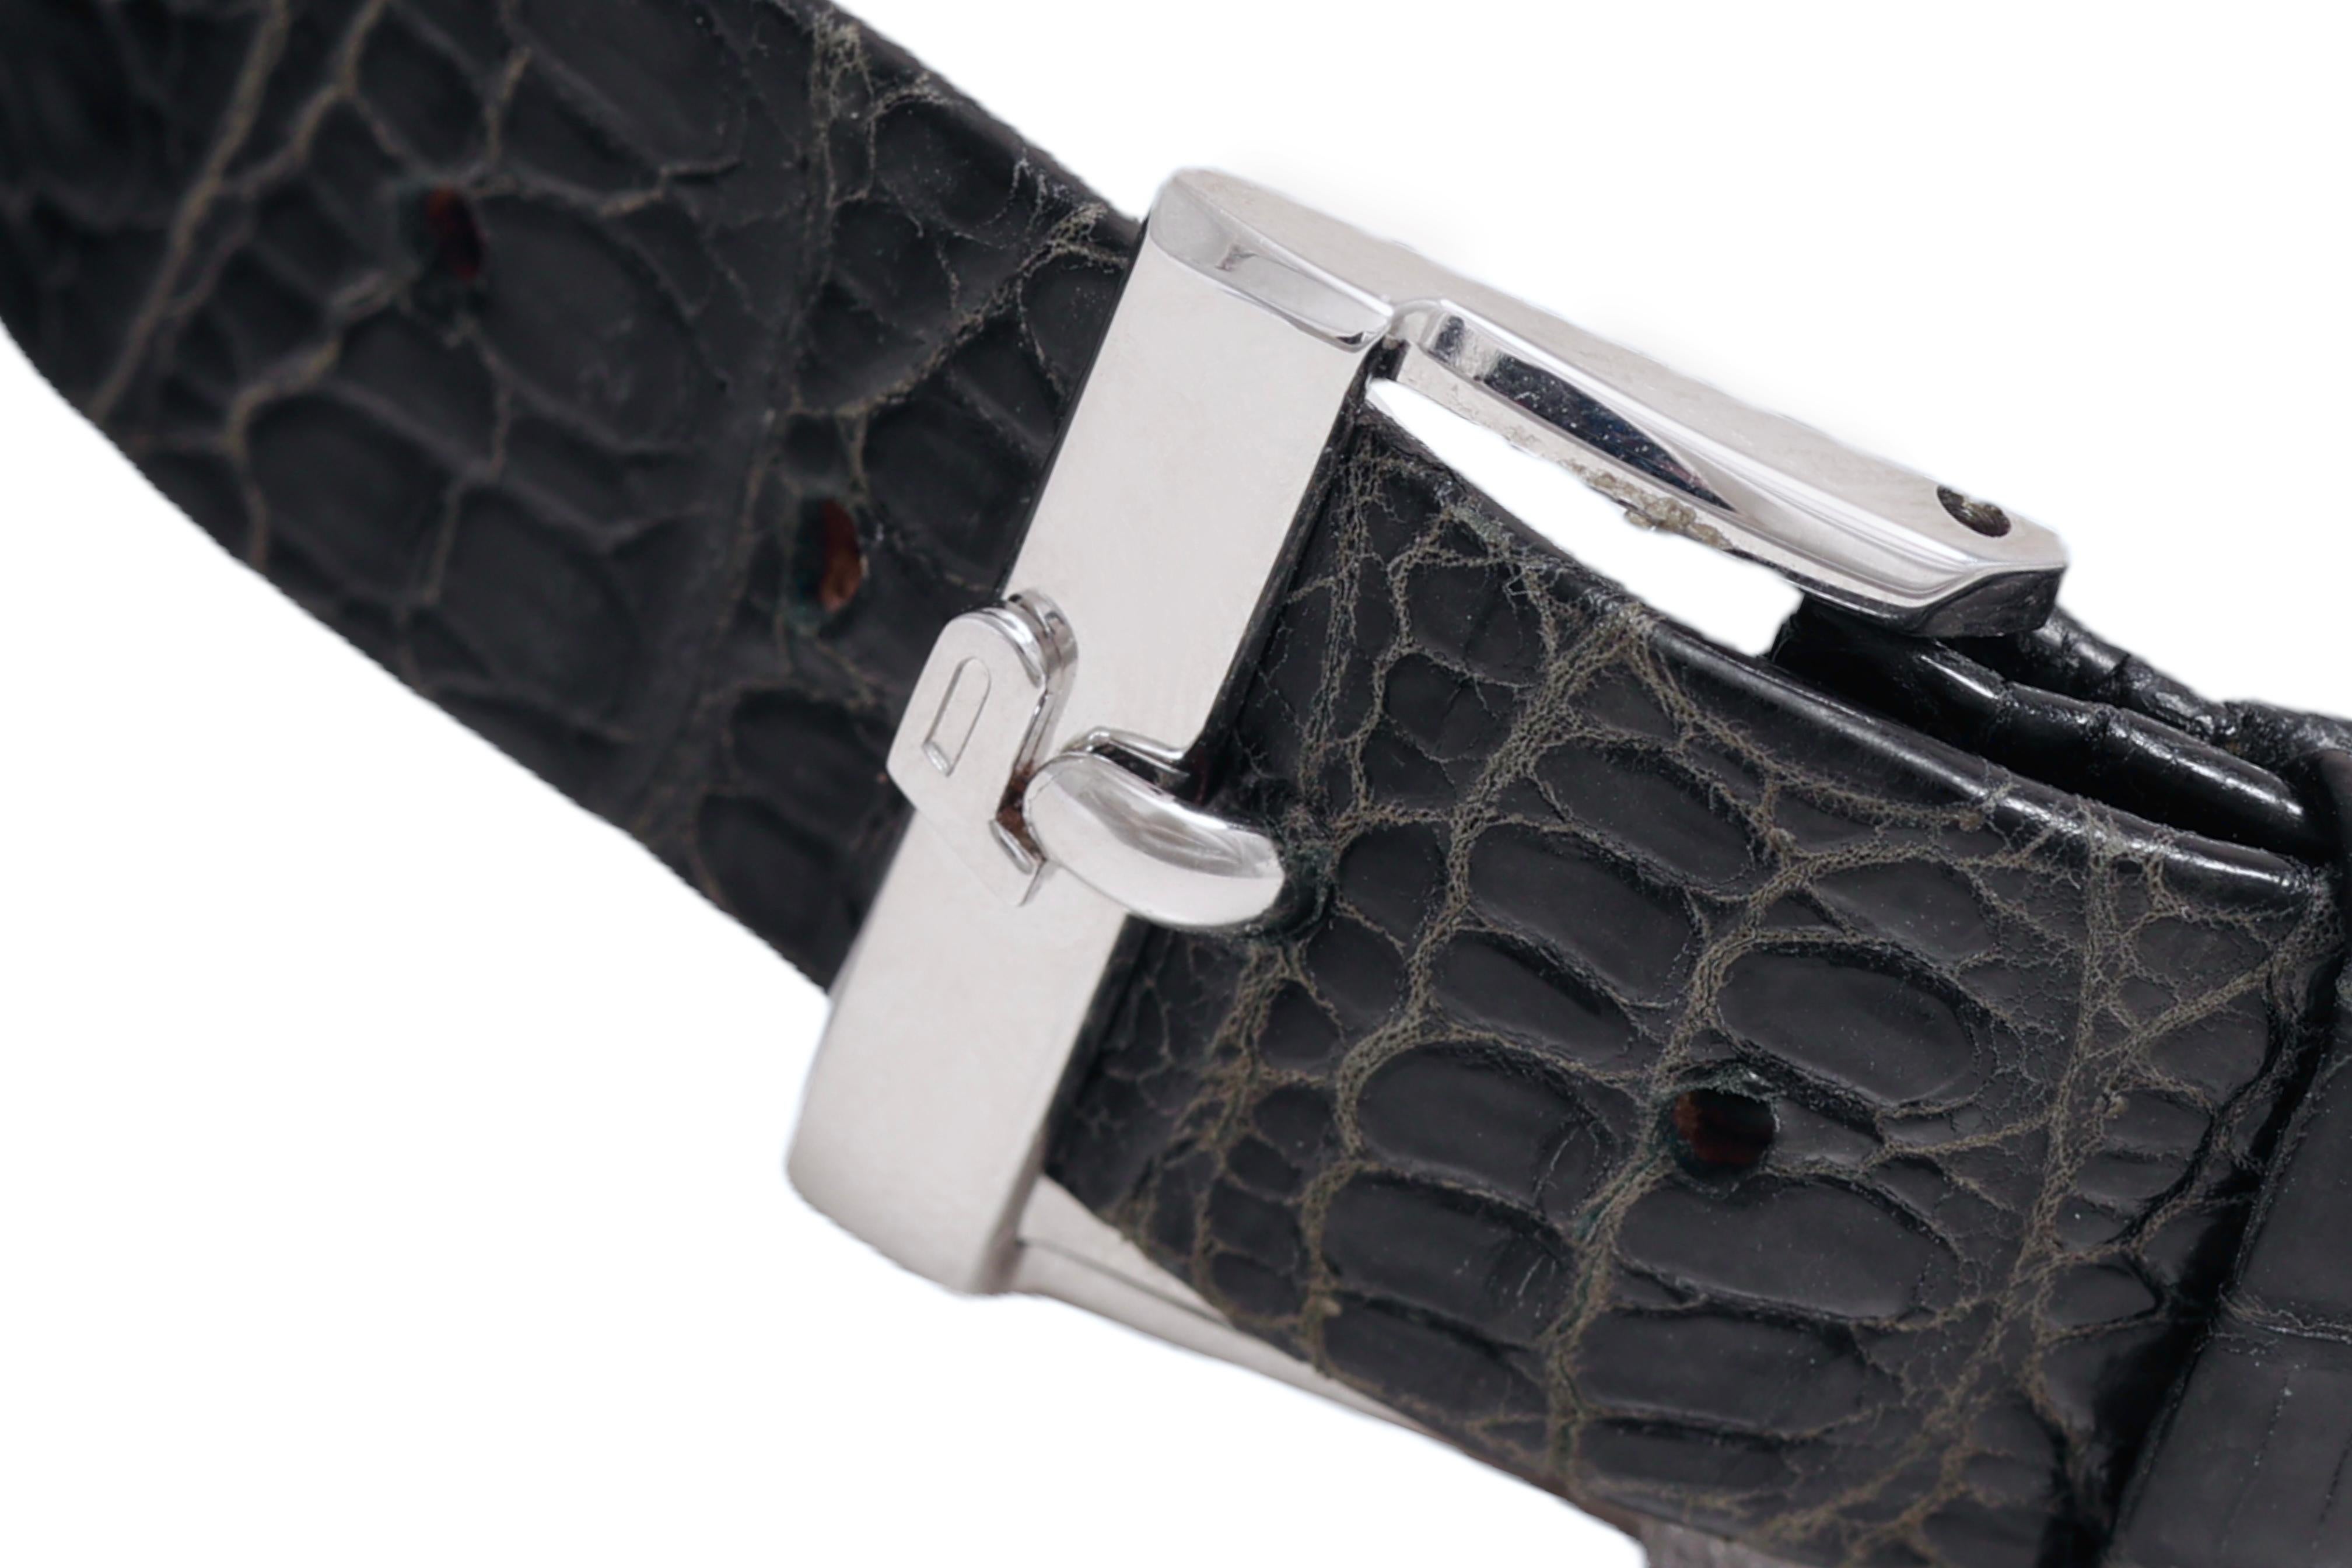 18 Kt White Gold Piaget Protocole Wrist Watch, Manual Winding For Sale 2